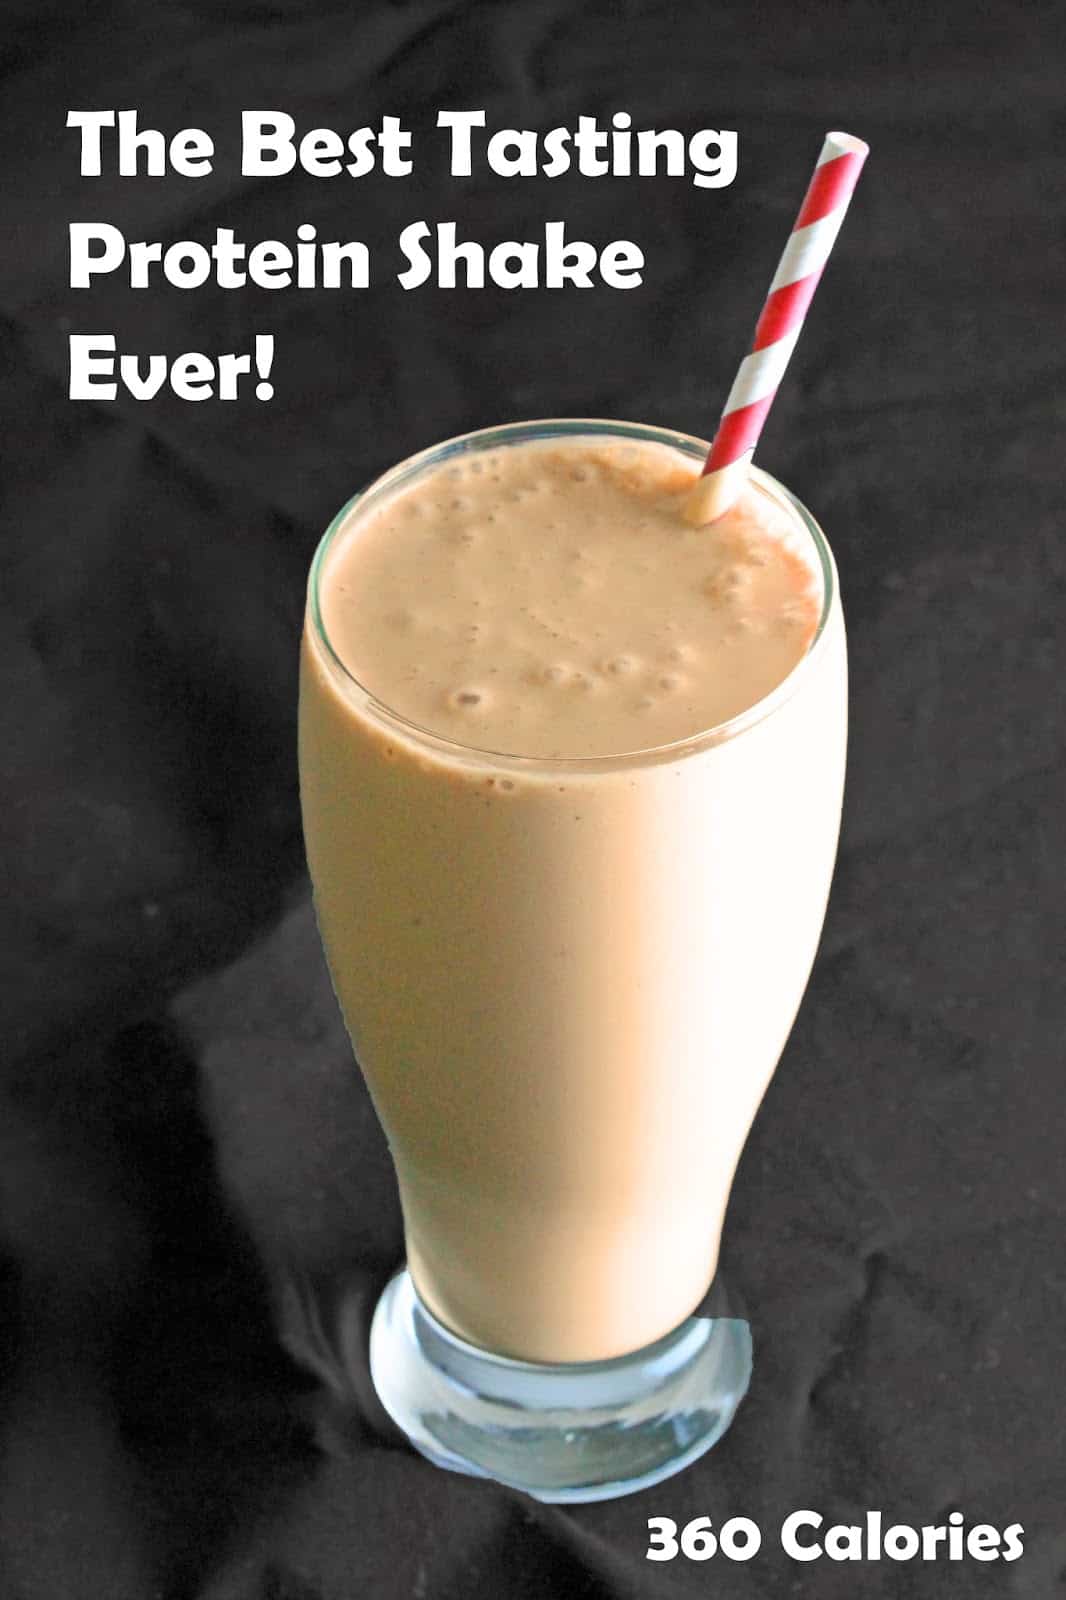 Protein shake in a glass with the words " Best Protein Shake Ever, 360 calories" on the picture.